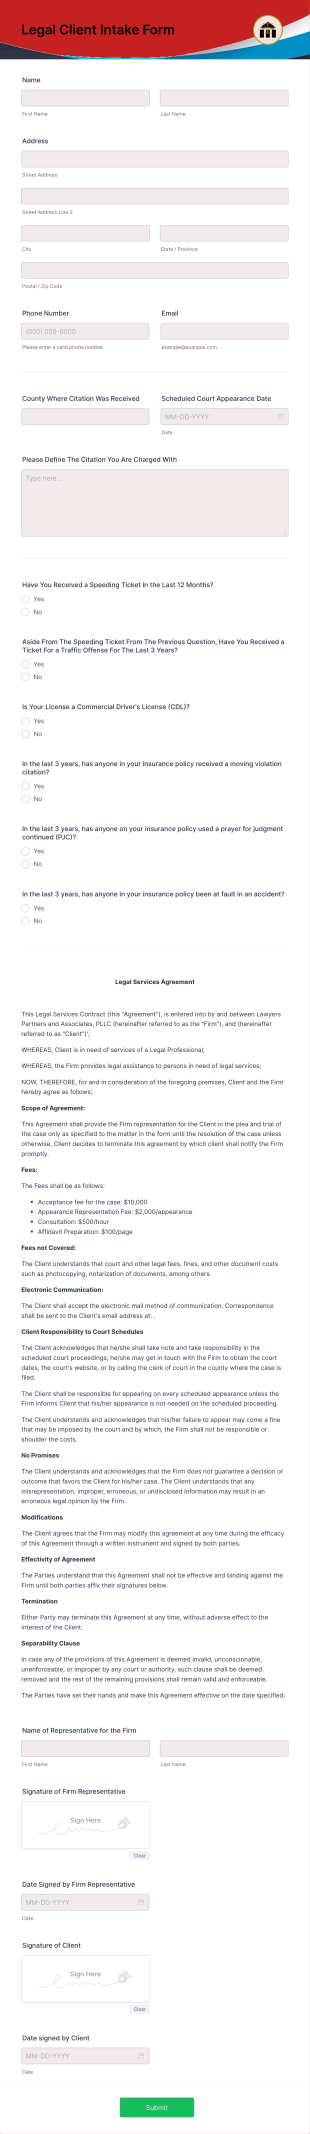 Legal Client Intake Form Template